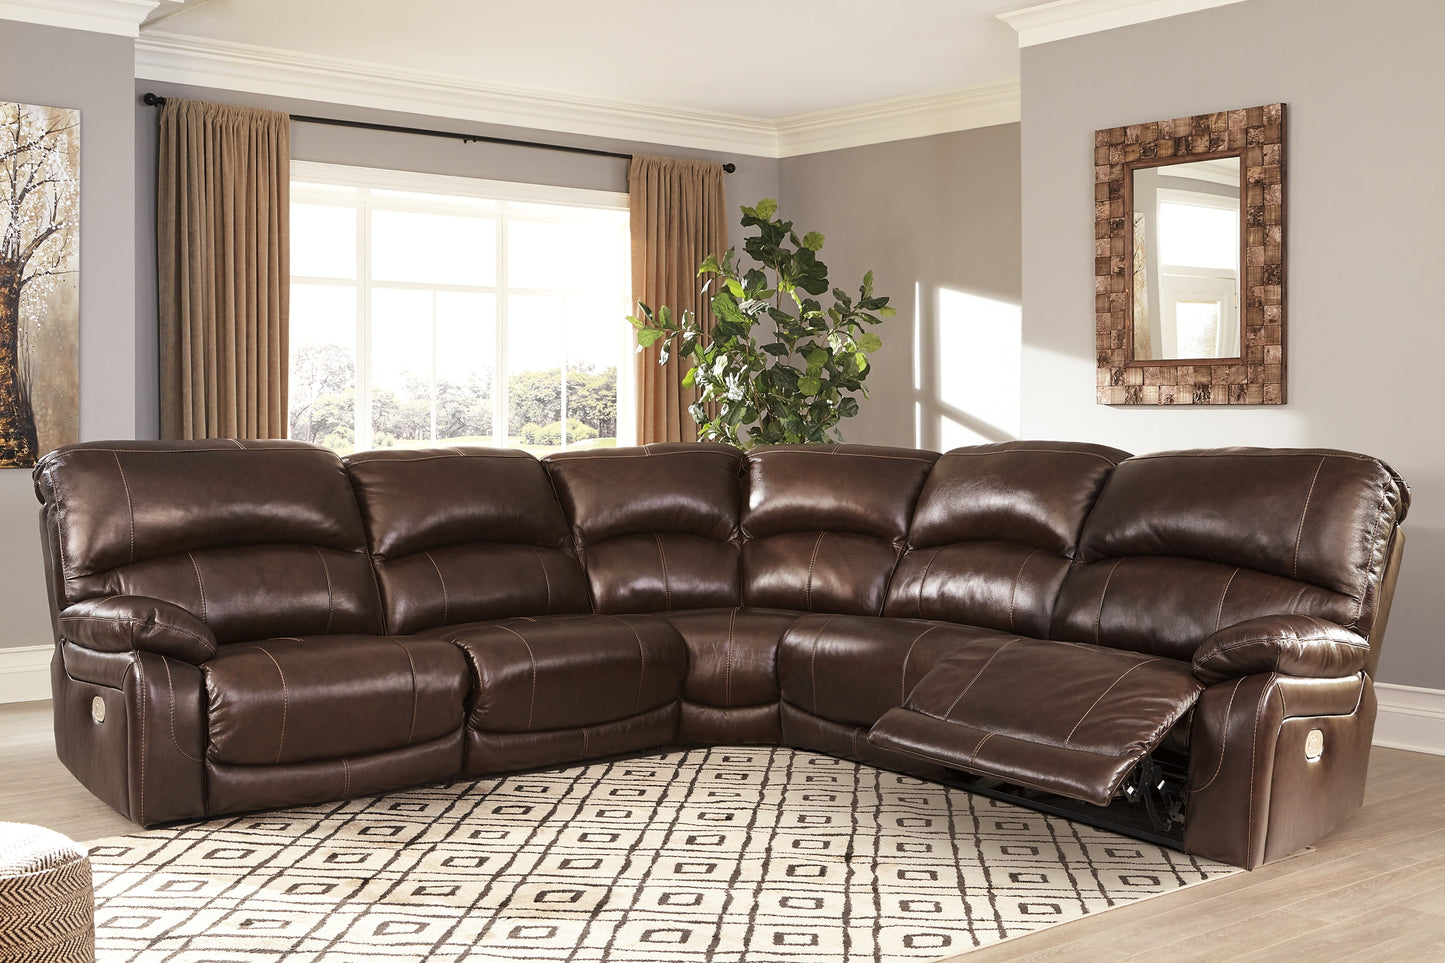 Hallstrung 5-Piece Power Reclining Sectional Signature Design by Ashley®